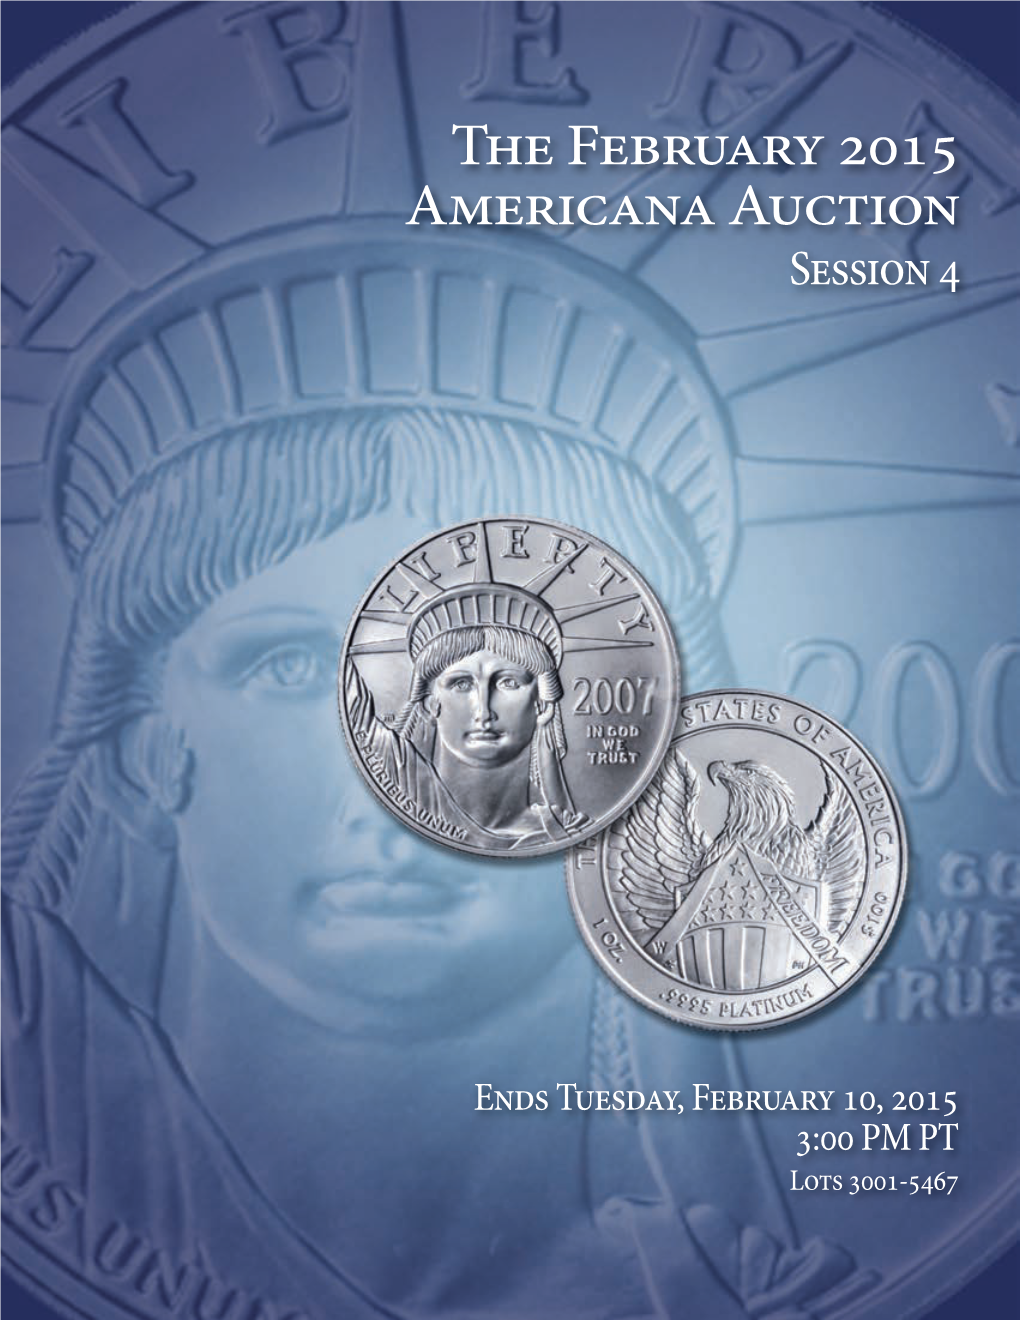 The February 2015 Americana Auction Session 4